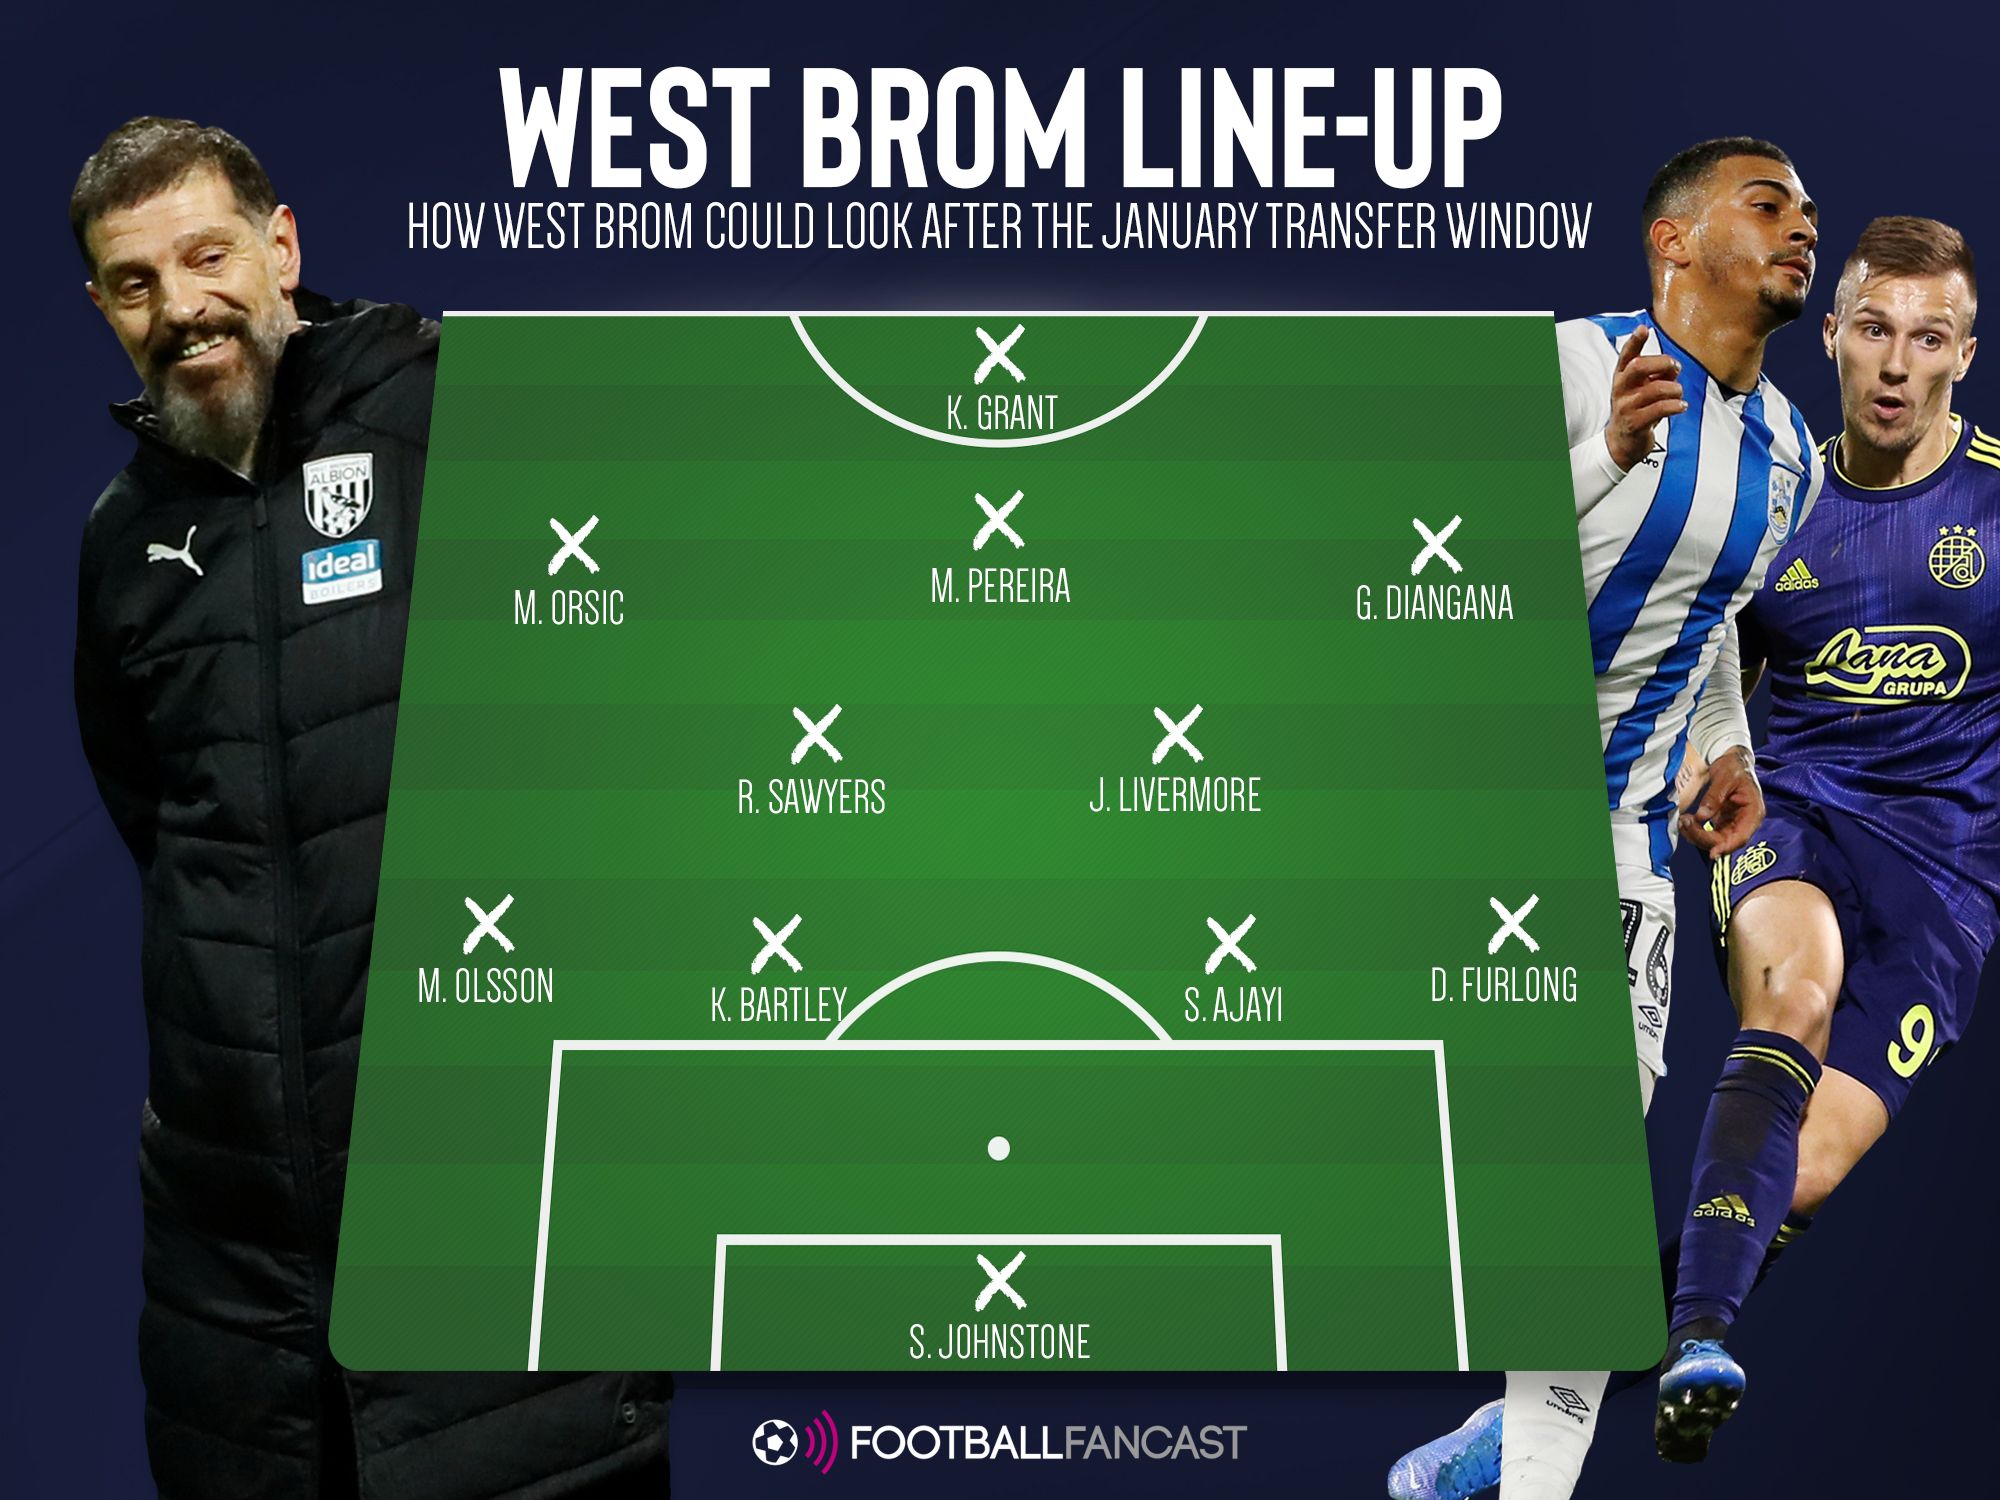 How West Brom could look after January